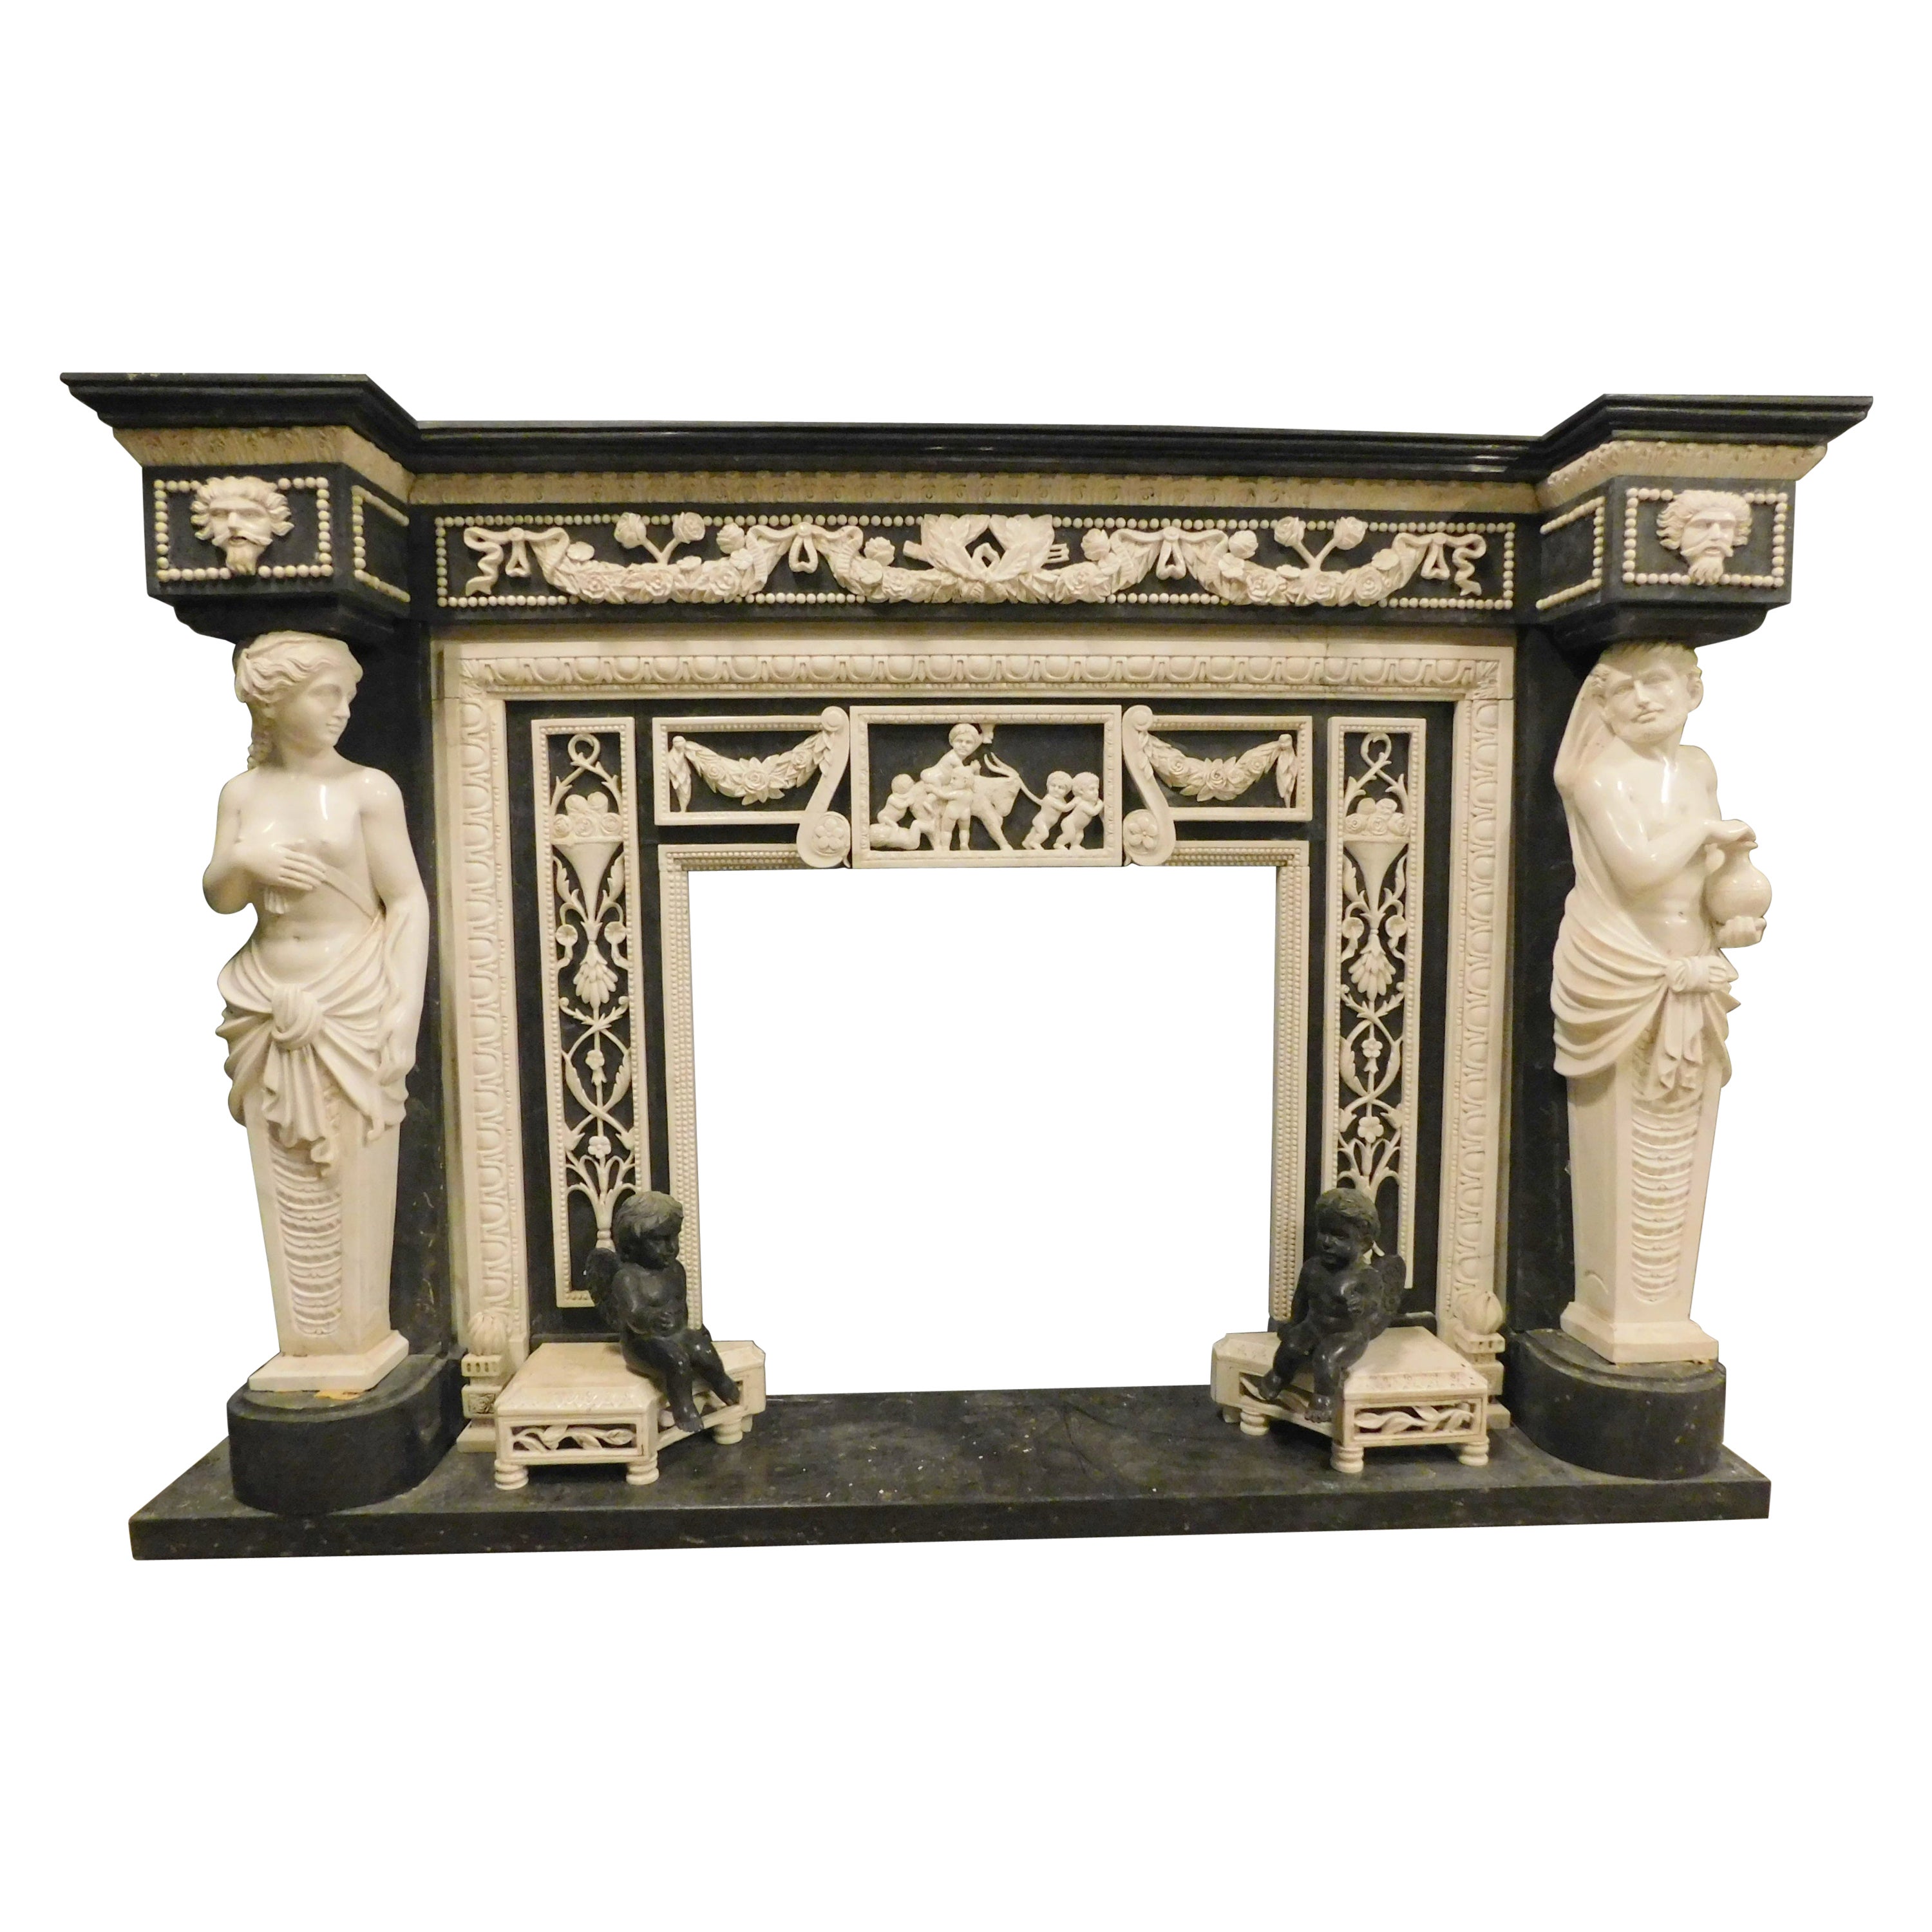 Fireplace Mantle Black and White Marble, Richly Carved, Neoclassical from Italy